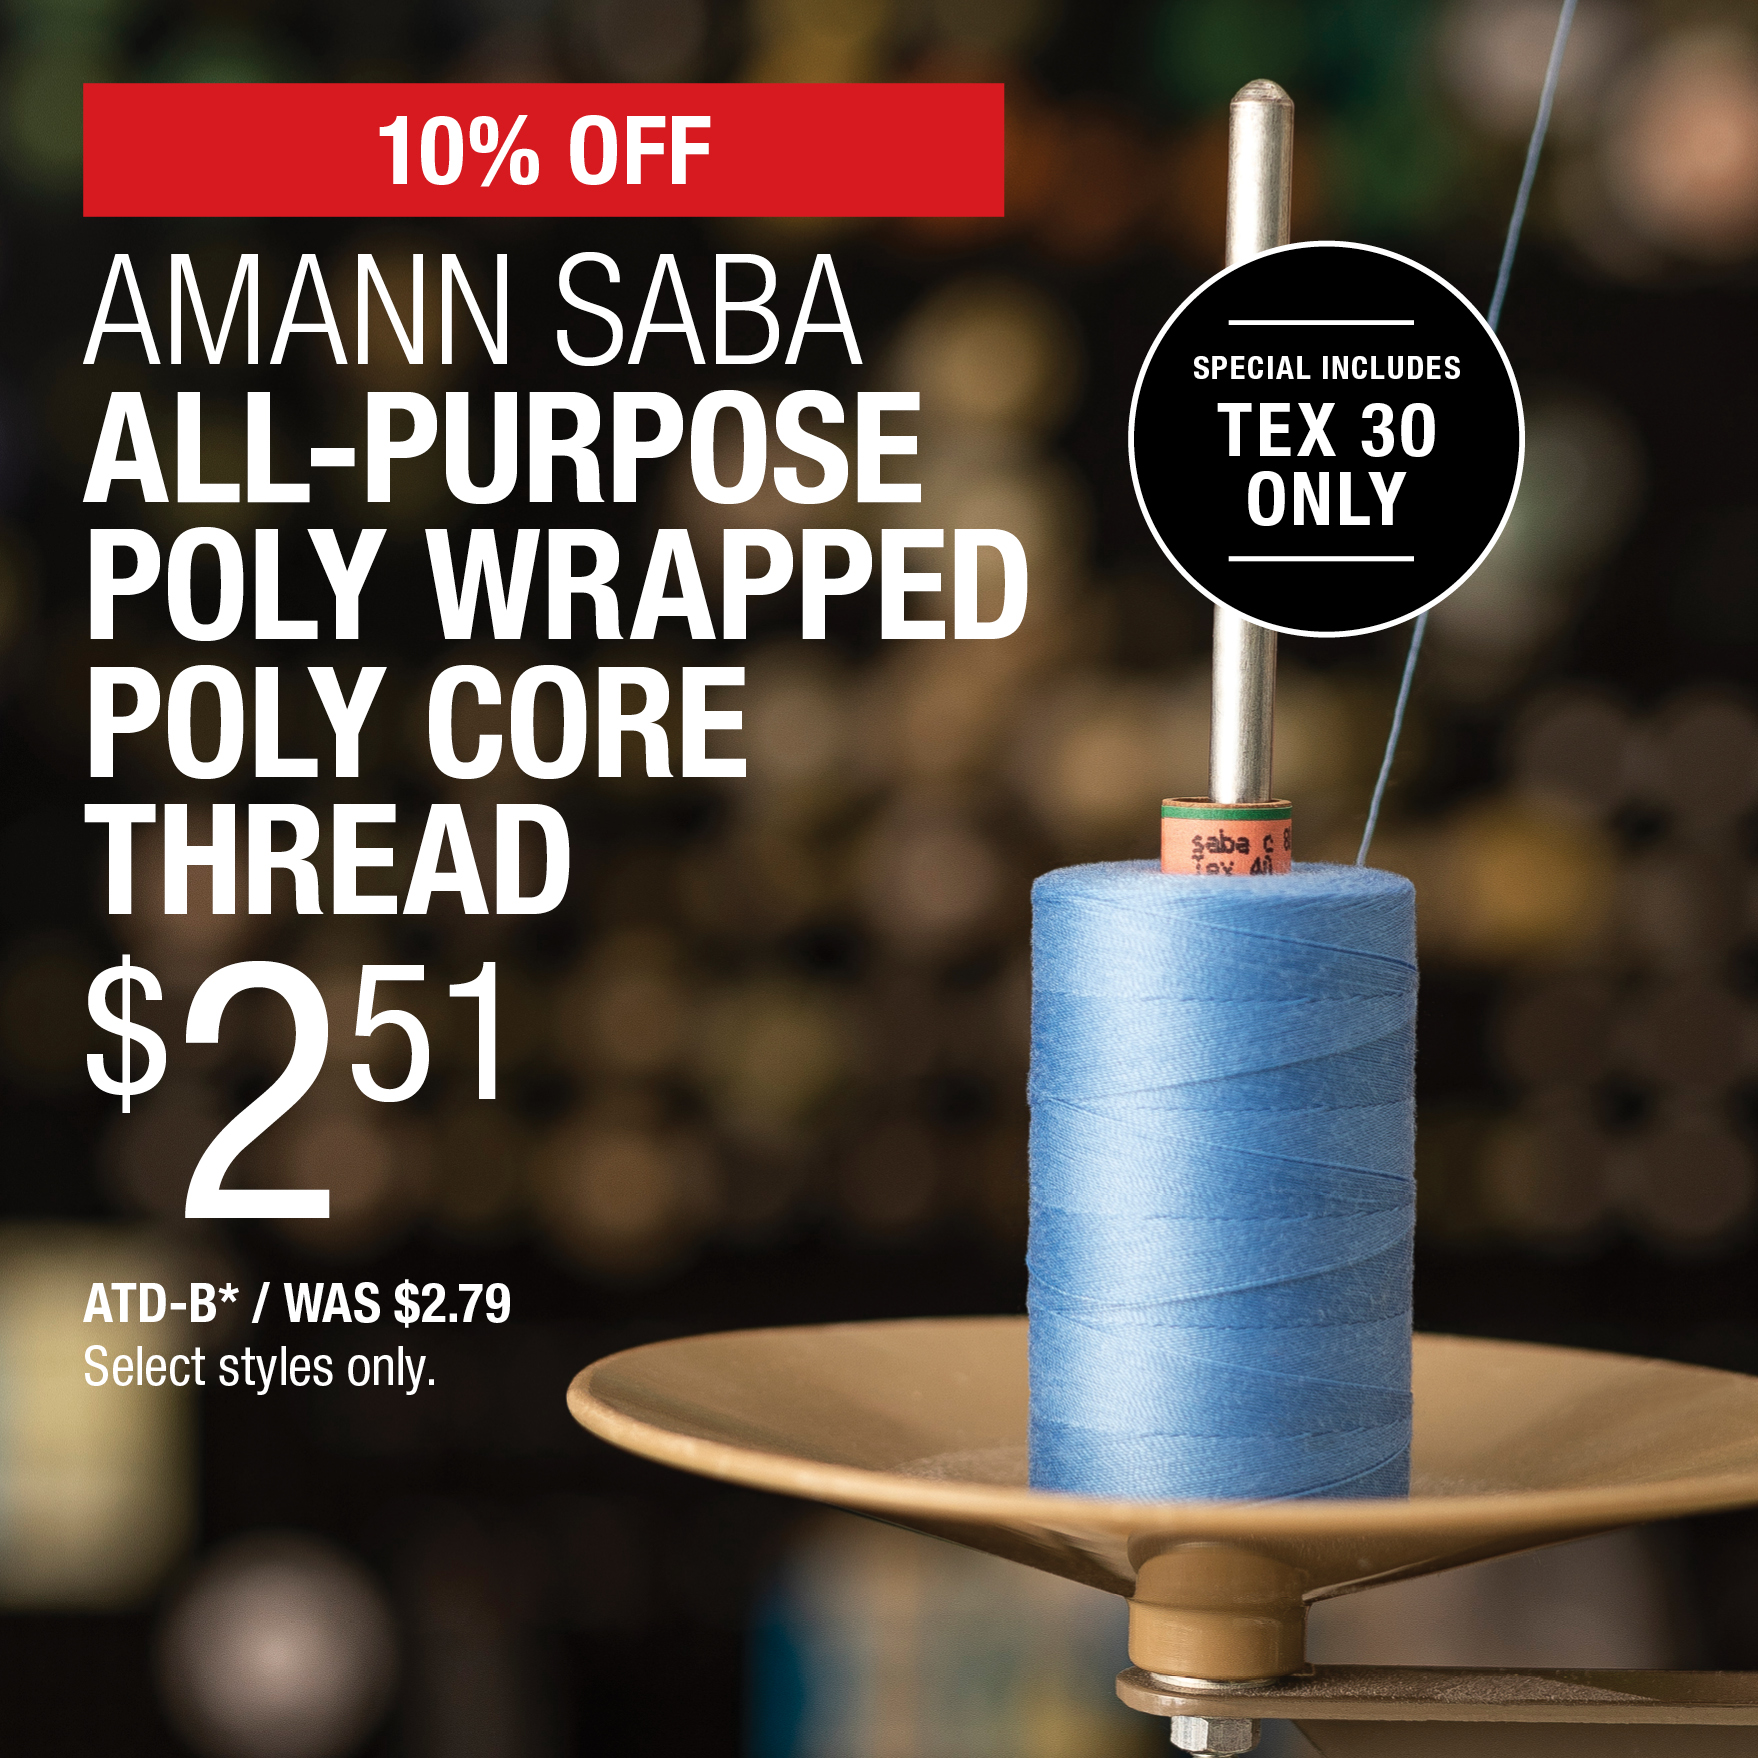 10% Off Amann Saba All-Purpose Poly Wrapped Poly Core Thread $2.51 / ATD-B* / Was $2.79 / Select styles only.